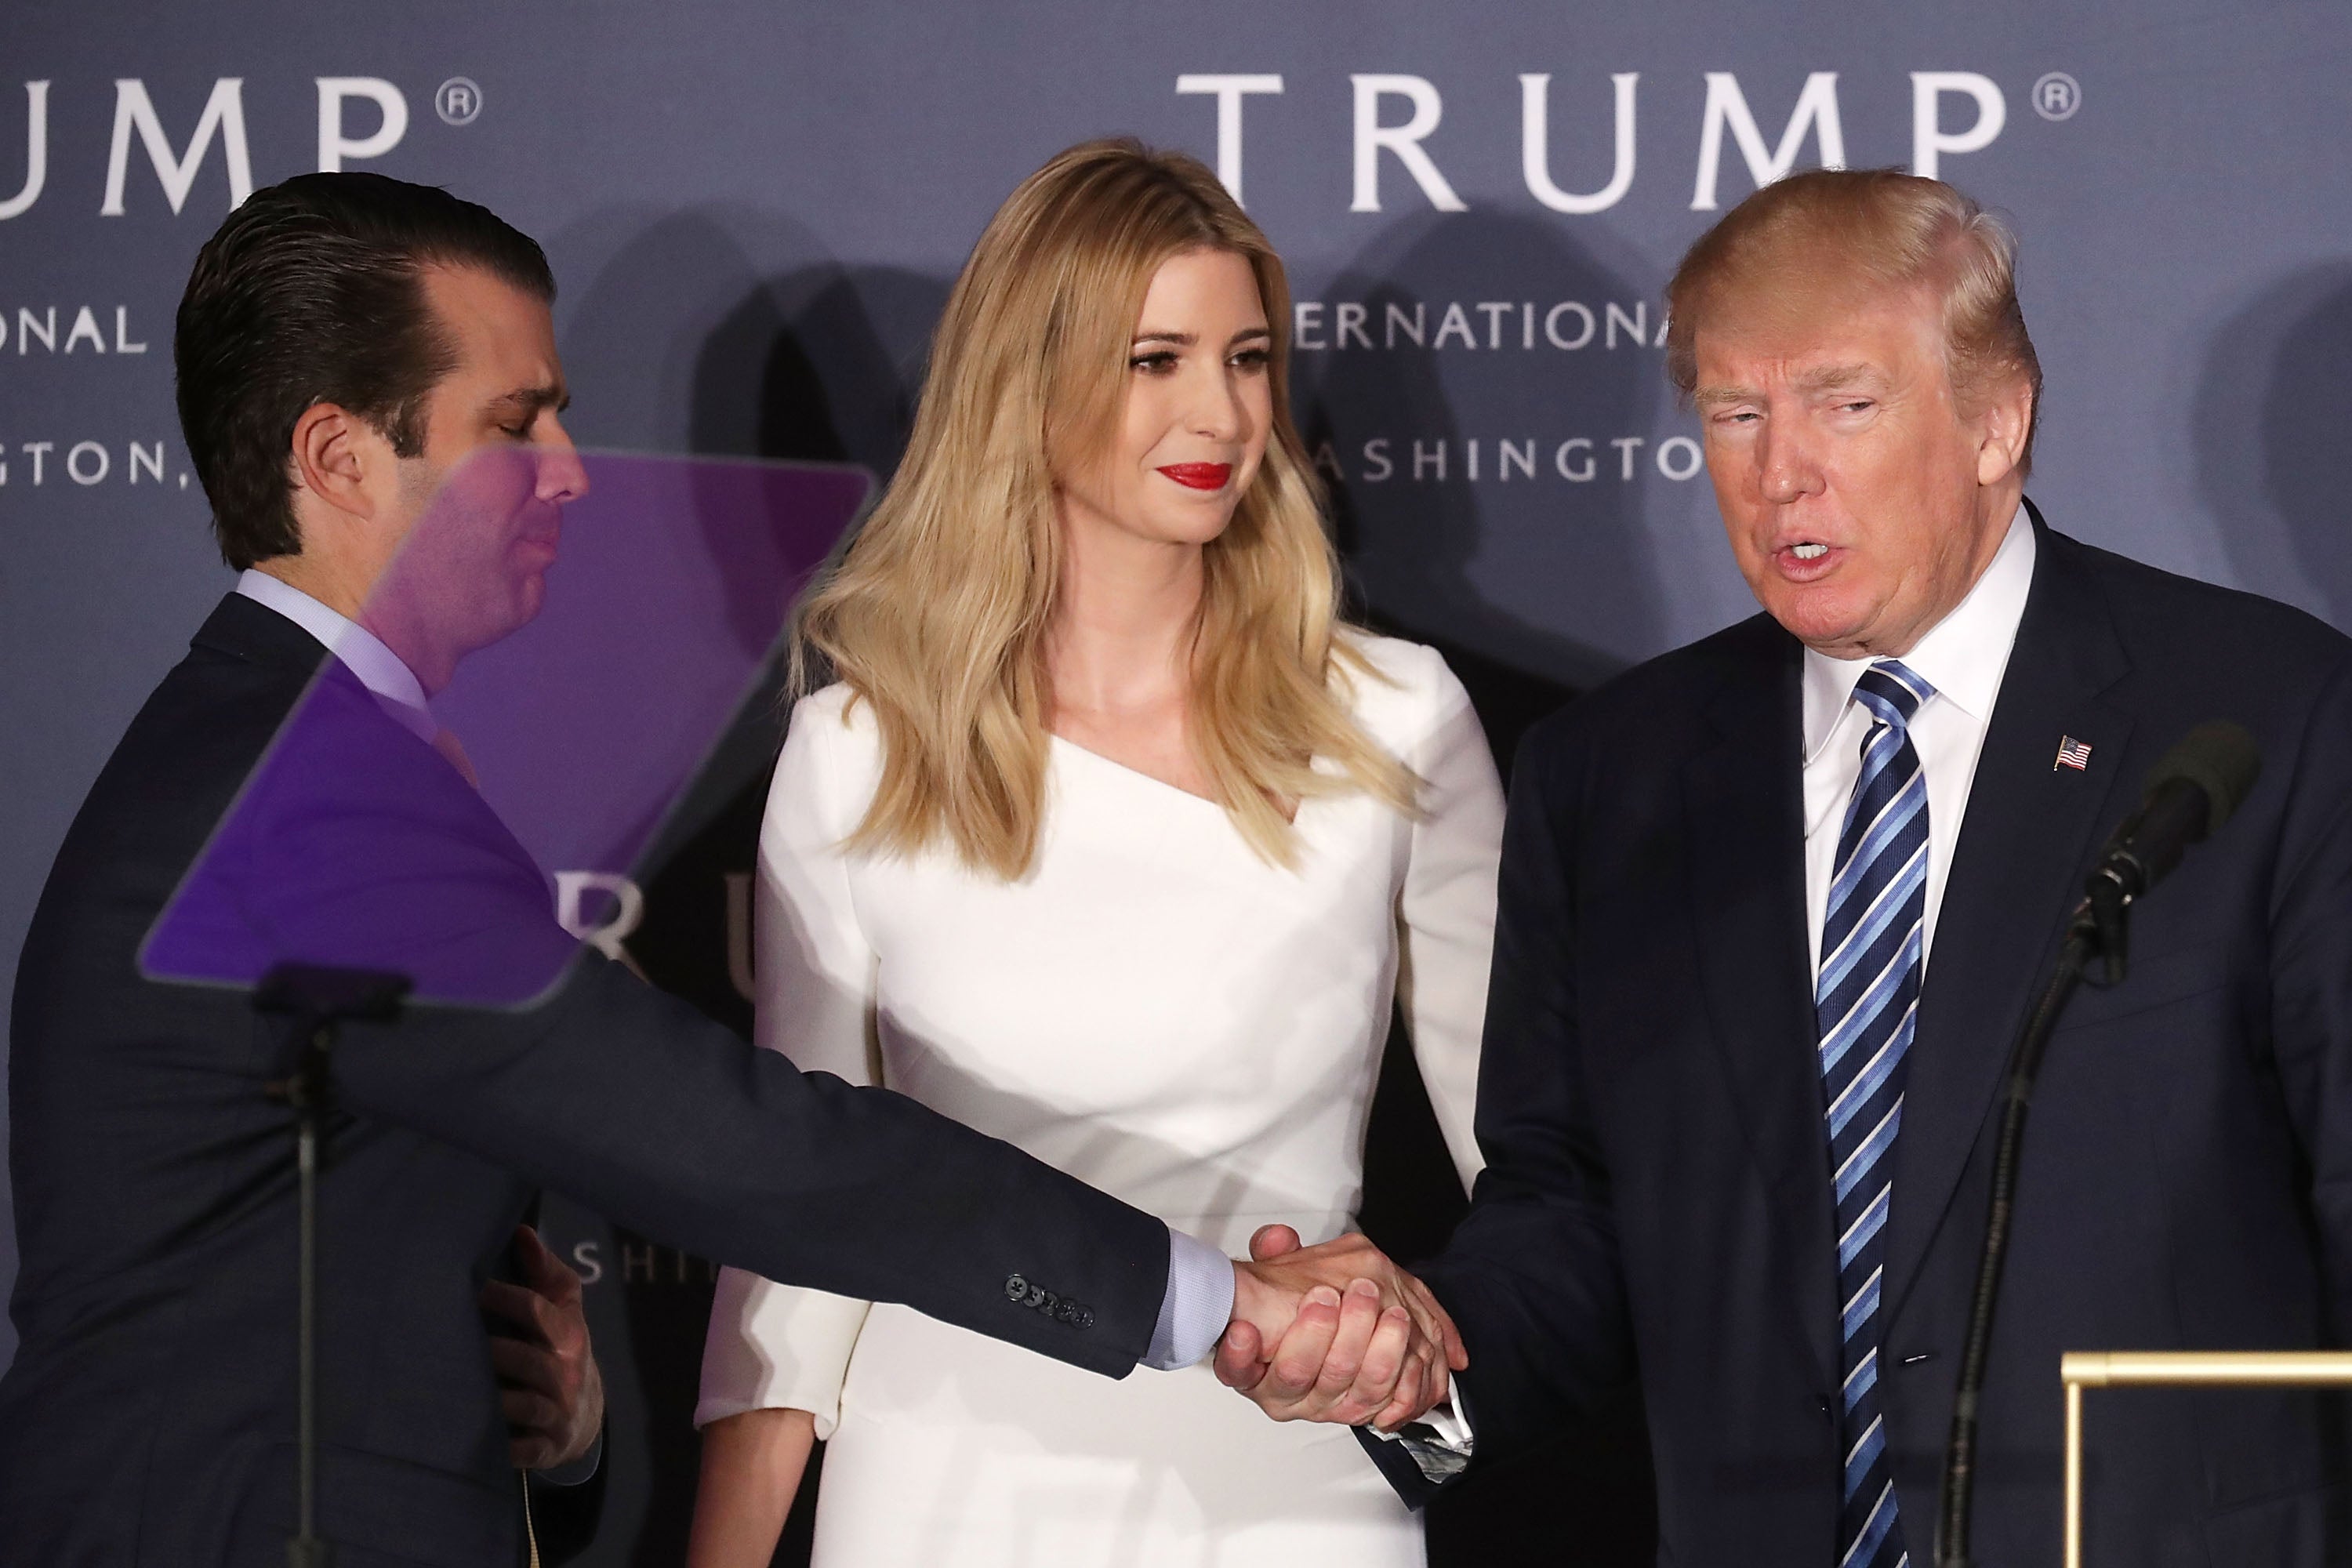 File: New York’s top prosecutor is seeking testimony from the former president, his son Donald Trump Jr and daughter Ivanka Trump